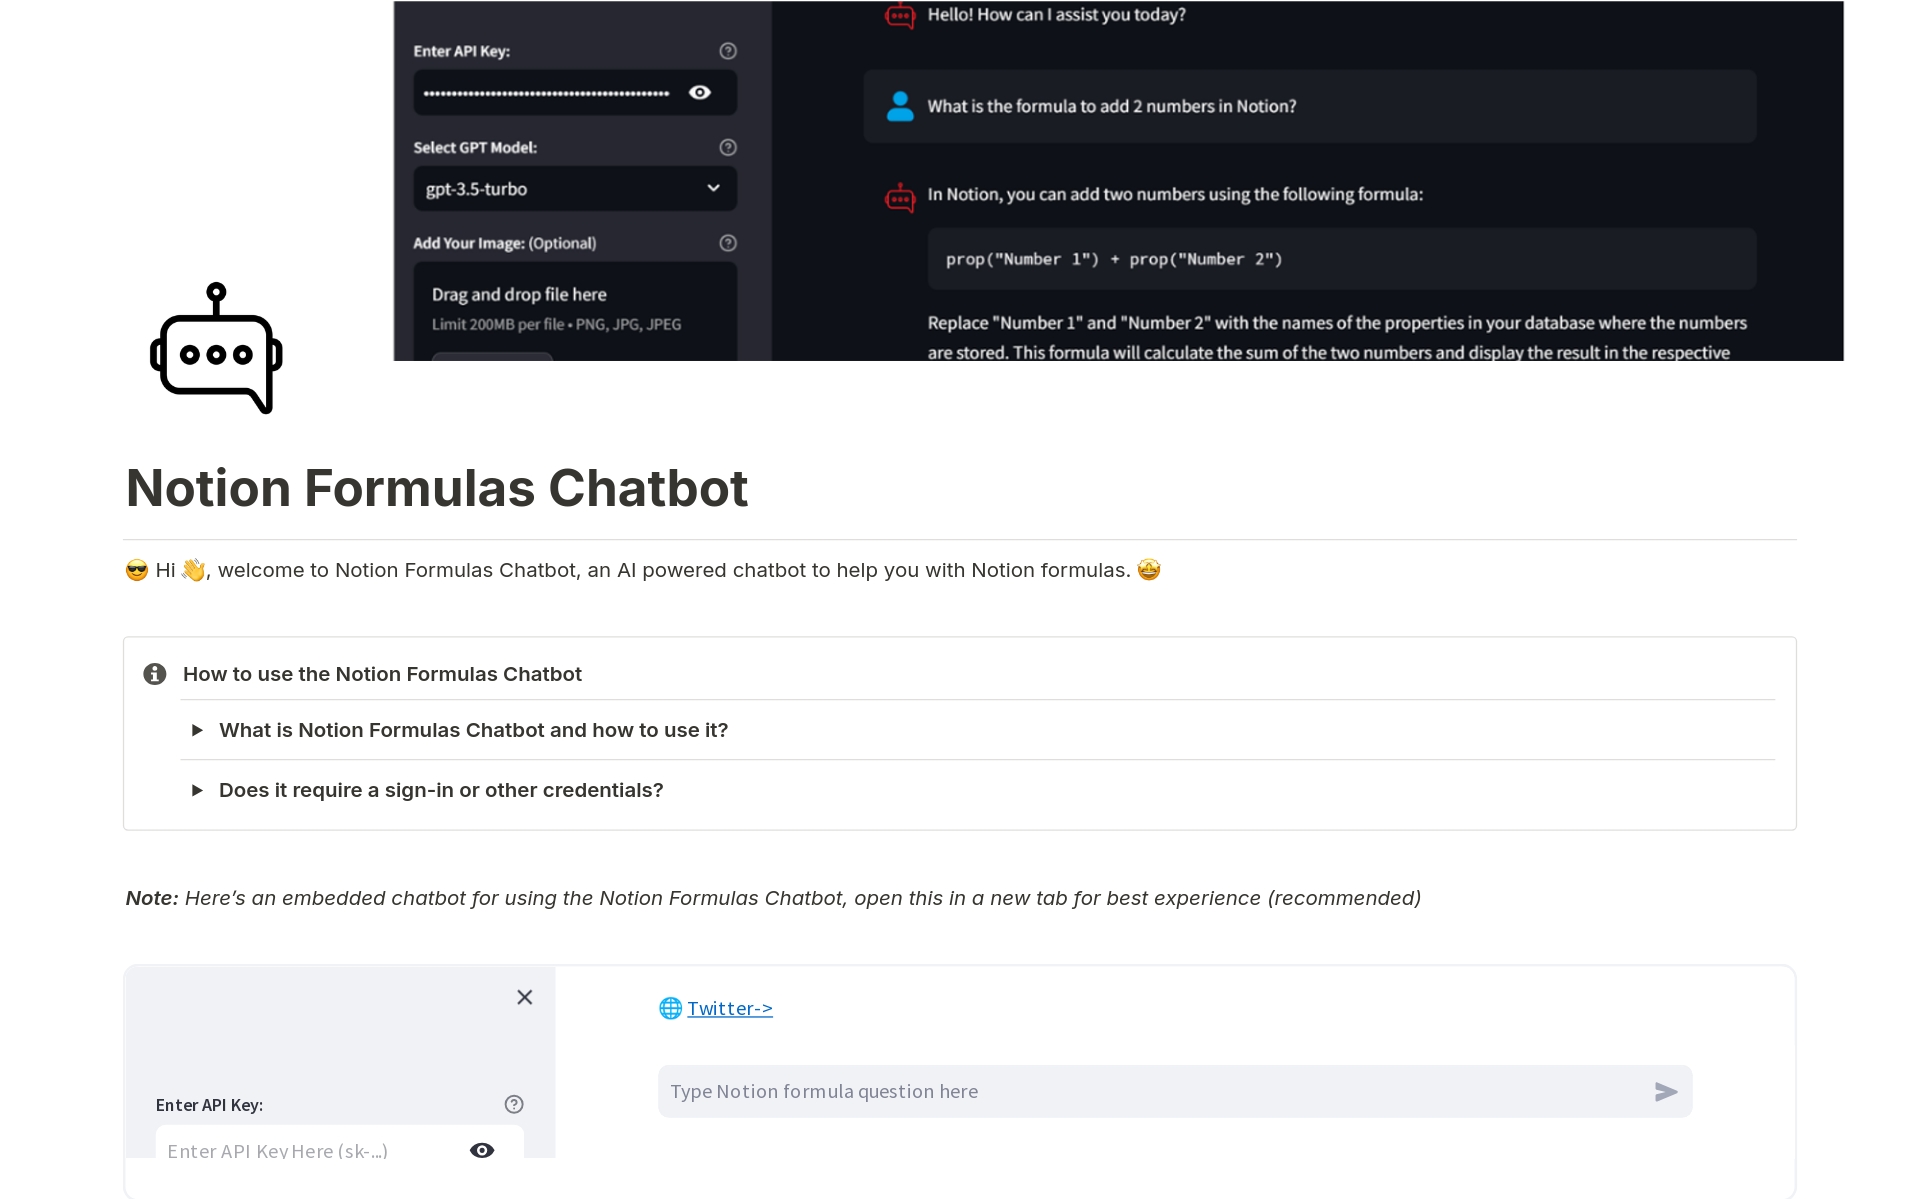 😎 Hi 👋, welcome to Notion Formulas Chatbot, an AI powered chatbot to help you with Notion formulas. 🤩